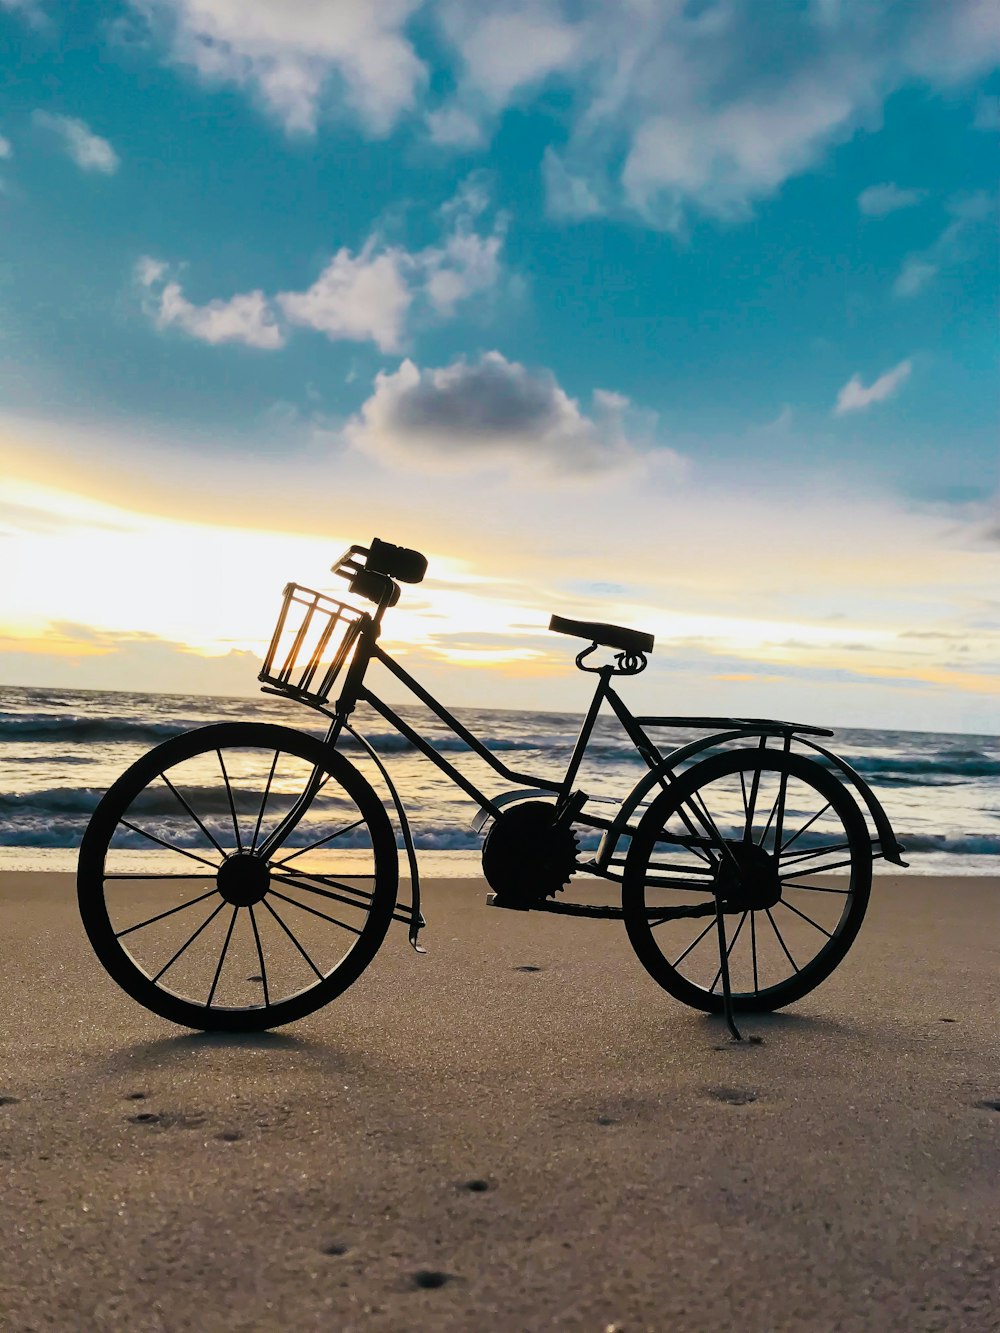 black beach bike on seashore viewing blue sea under white and blue sky during daytime